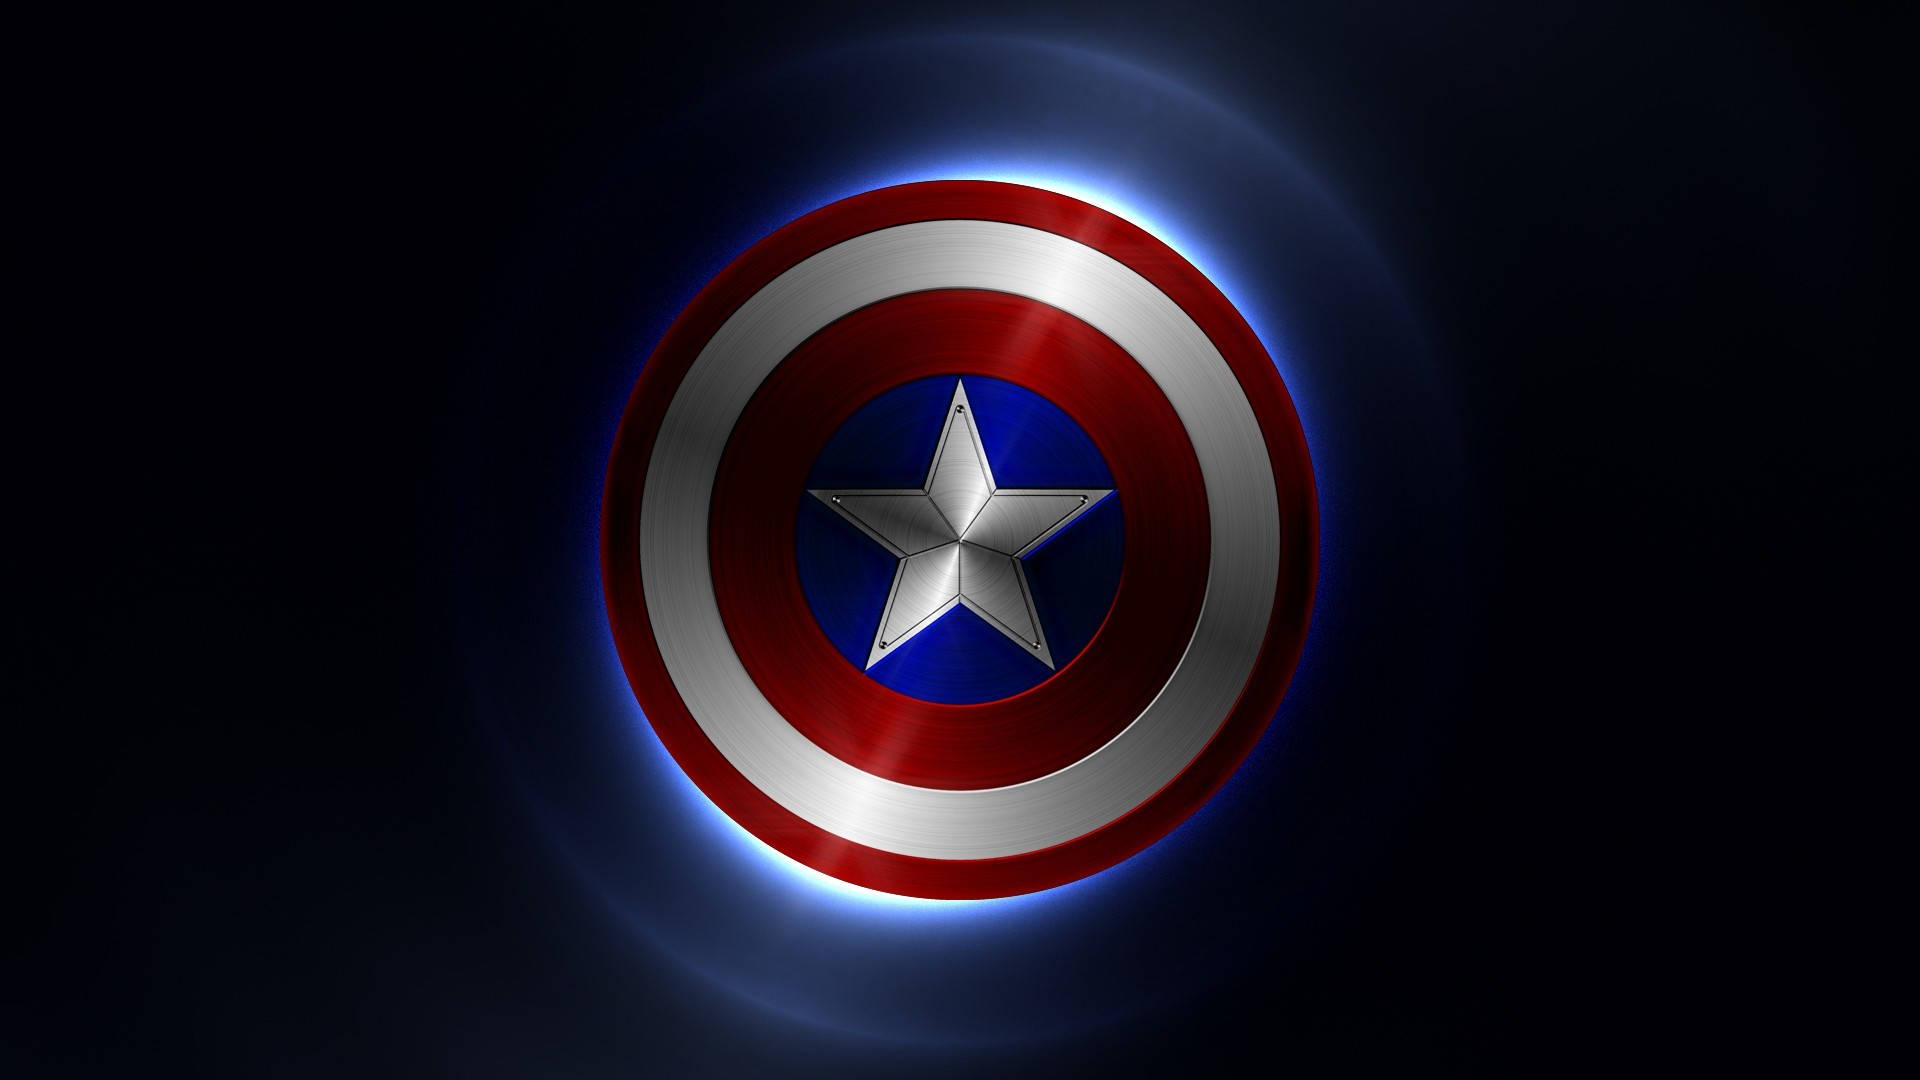 Captain America's shield with city Wallpaper 5k Ultra HD ID:7615